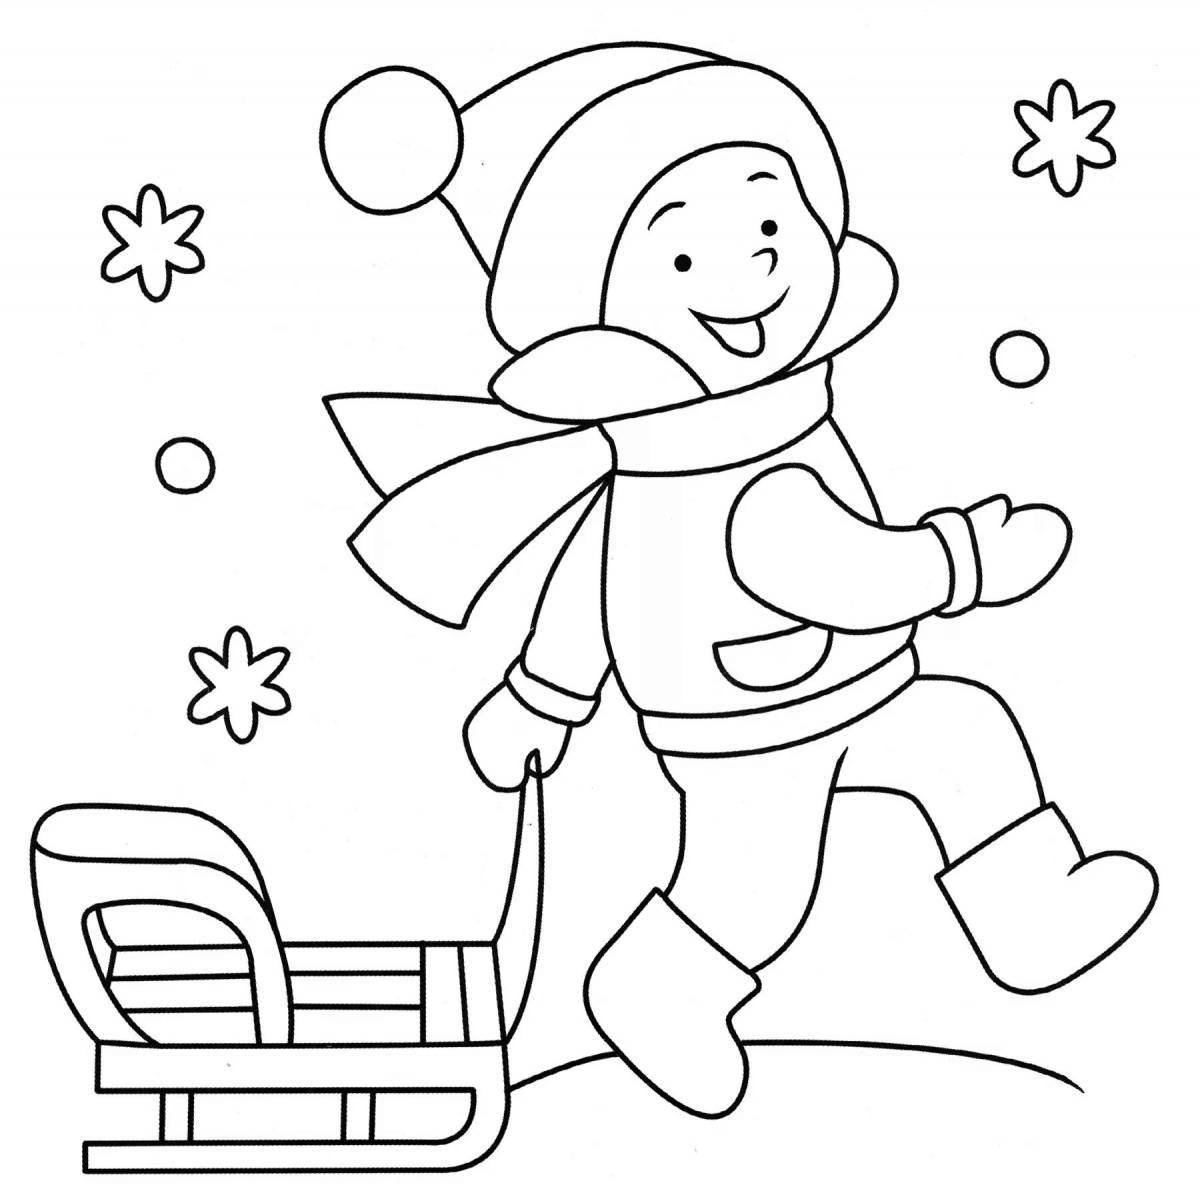 Colorful children's coloring book on a sled